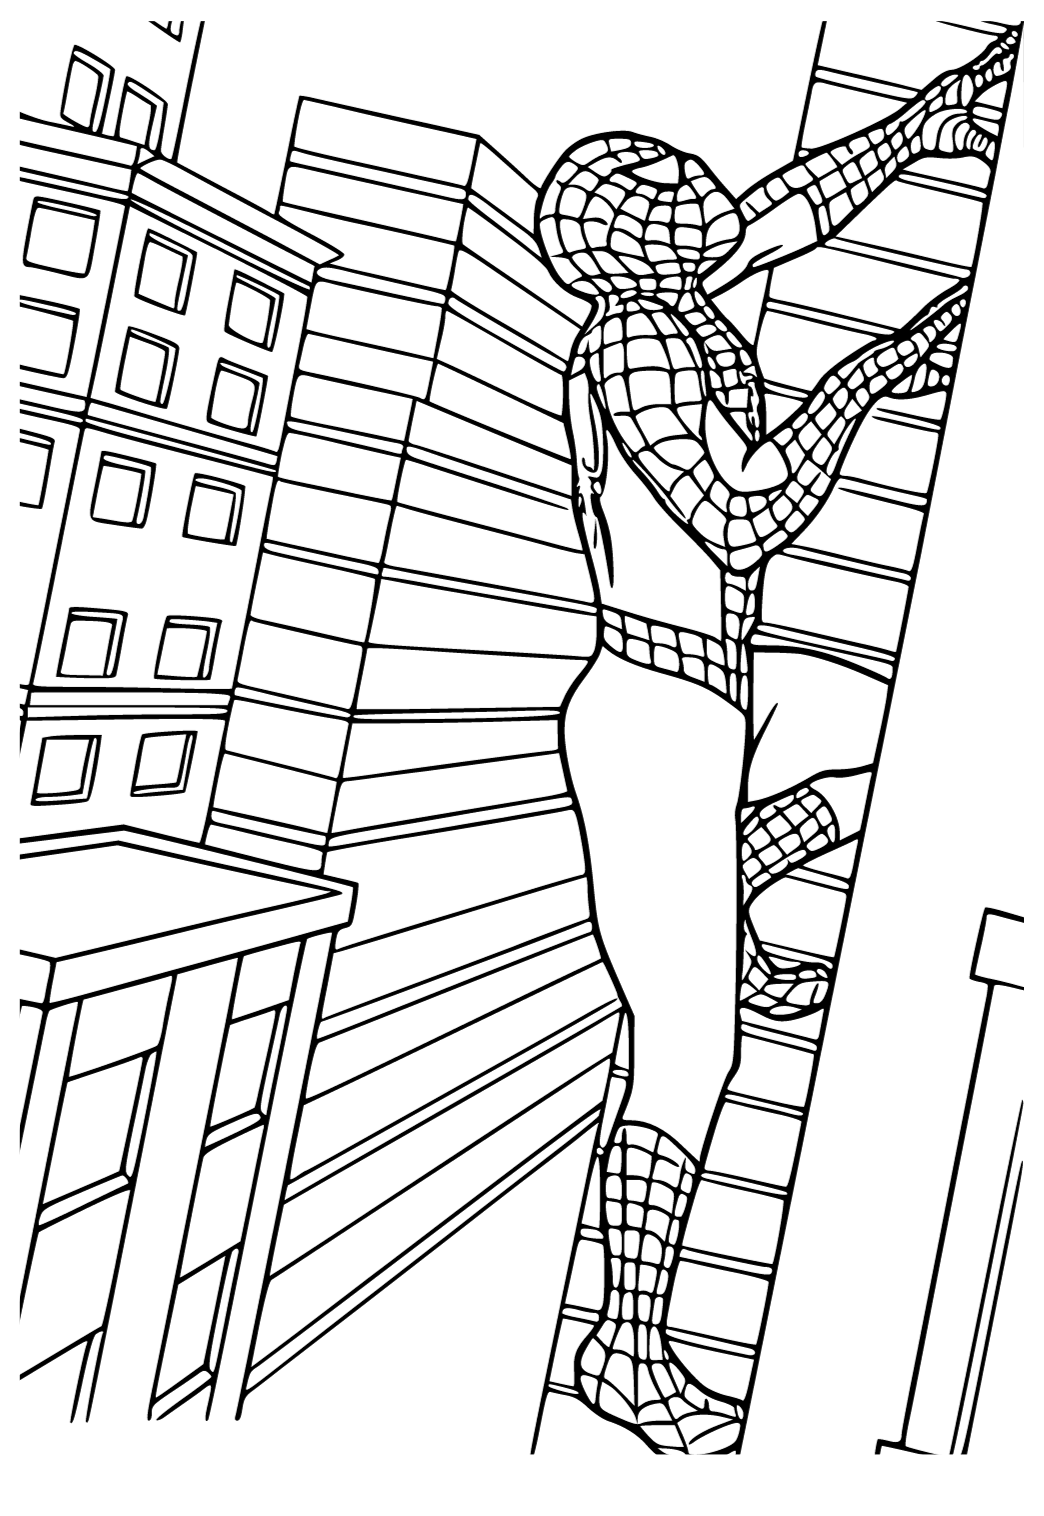 Free printable spiderman wall coloring page for adults and kids